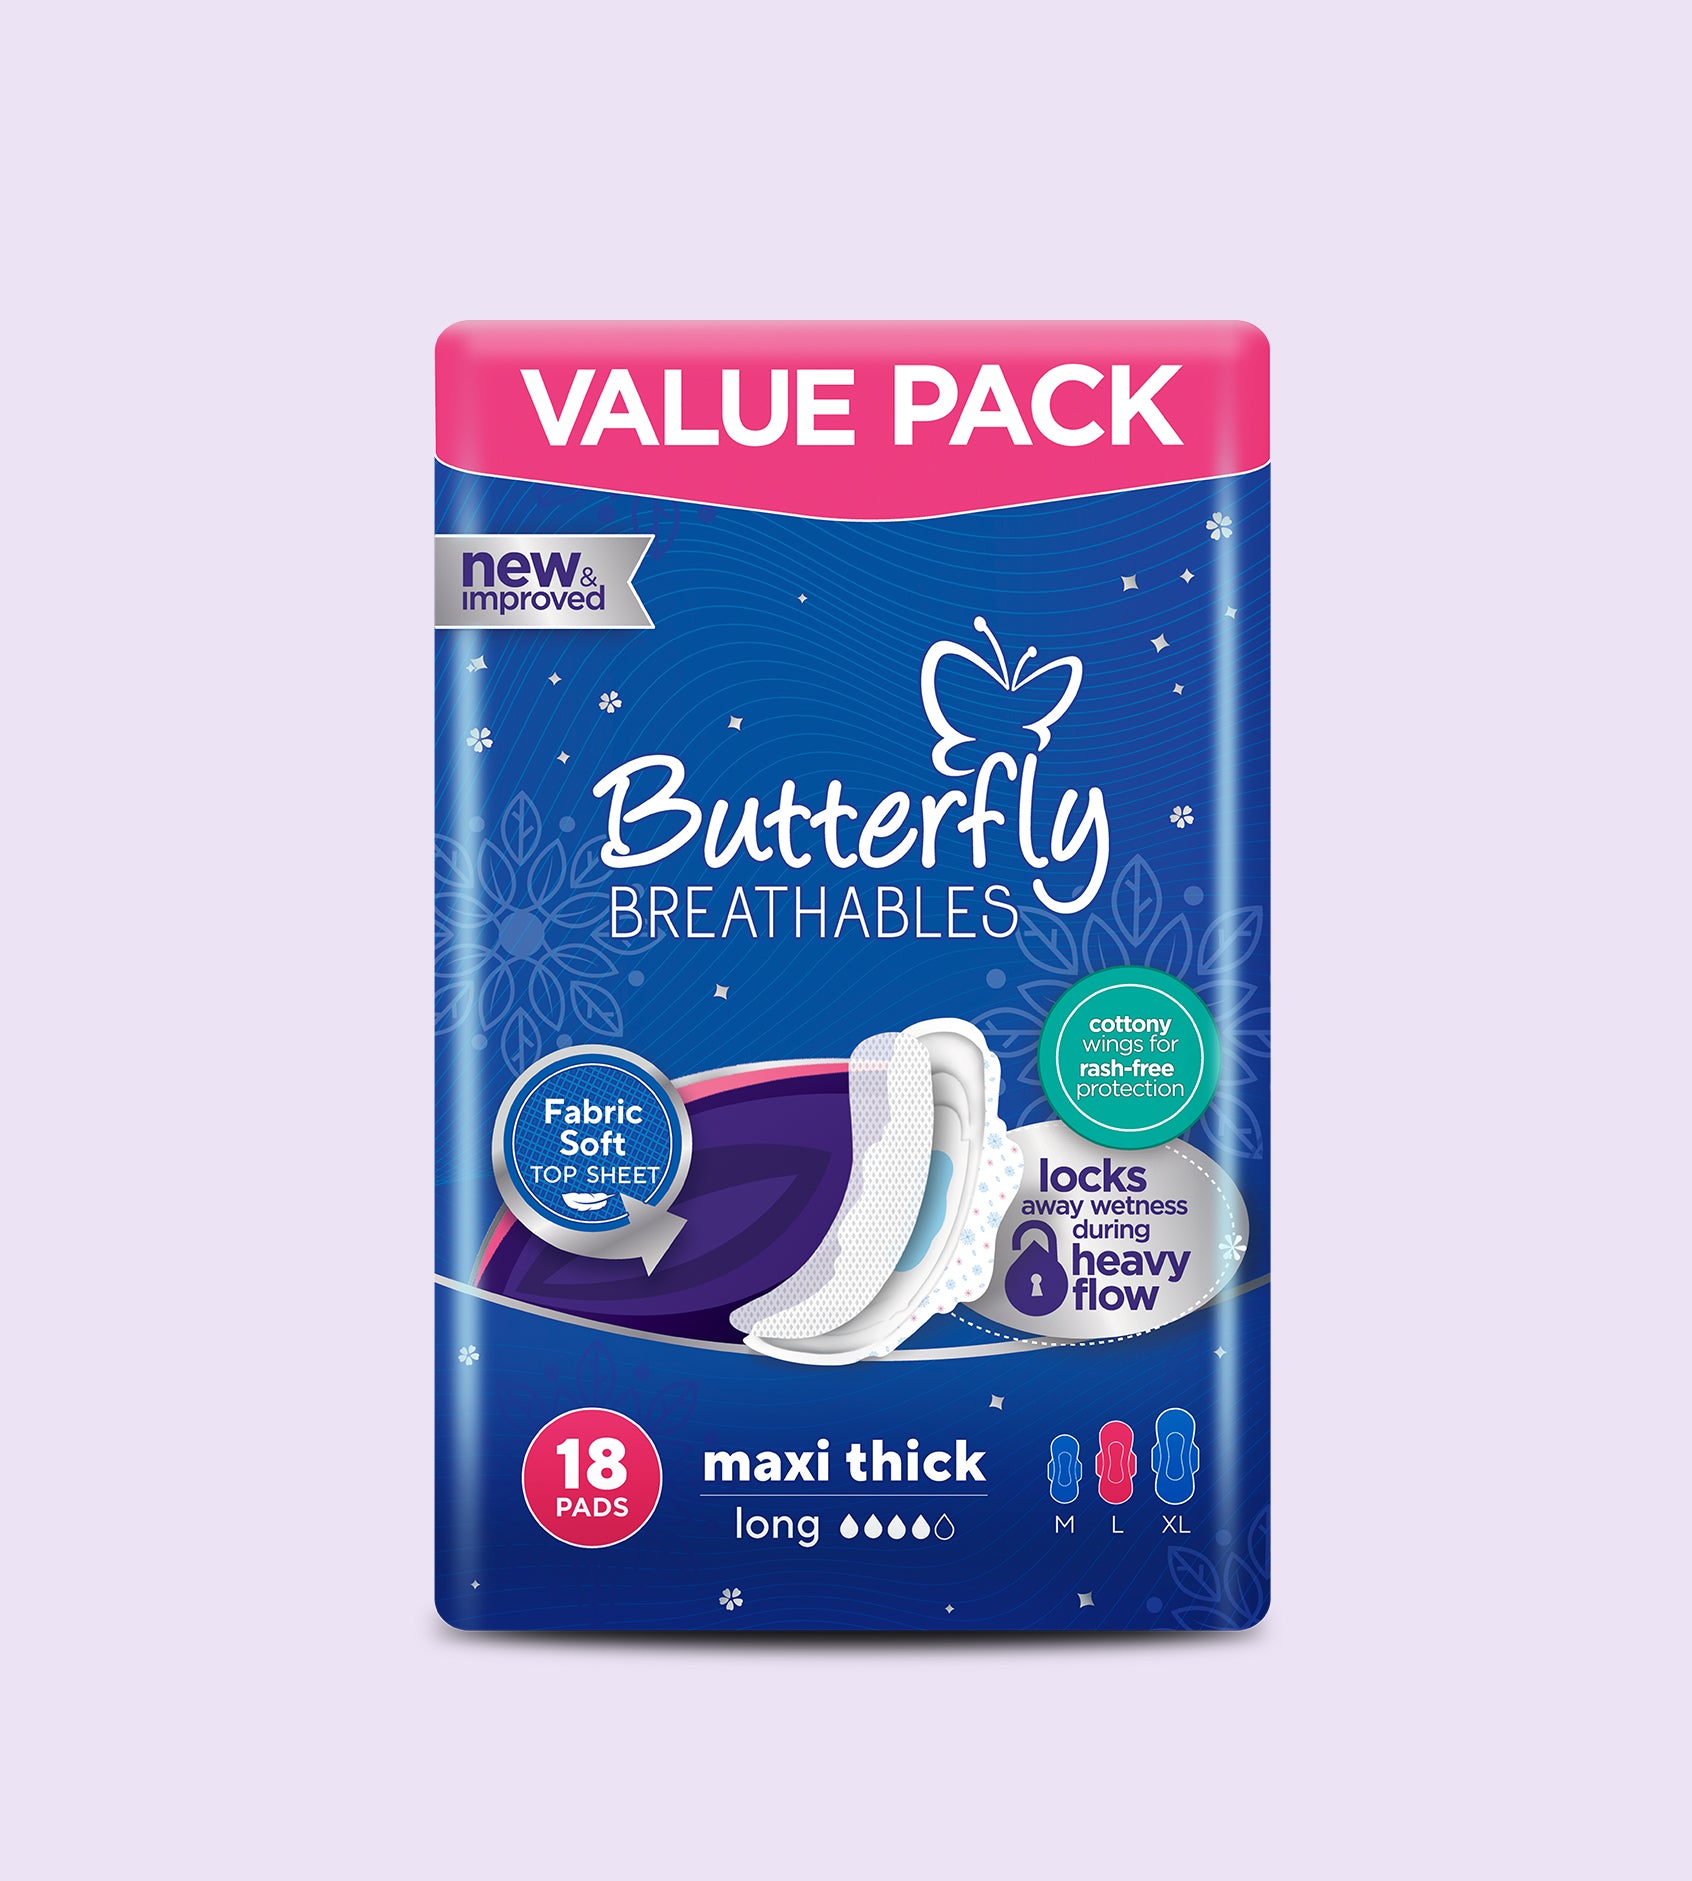 Butterfly Breathables Maxi Thick Fabric Soft Sanitary Pads Long Value Pack 18 Pcs